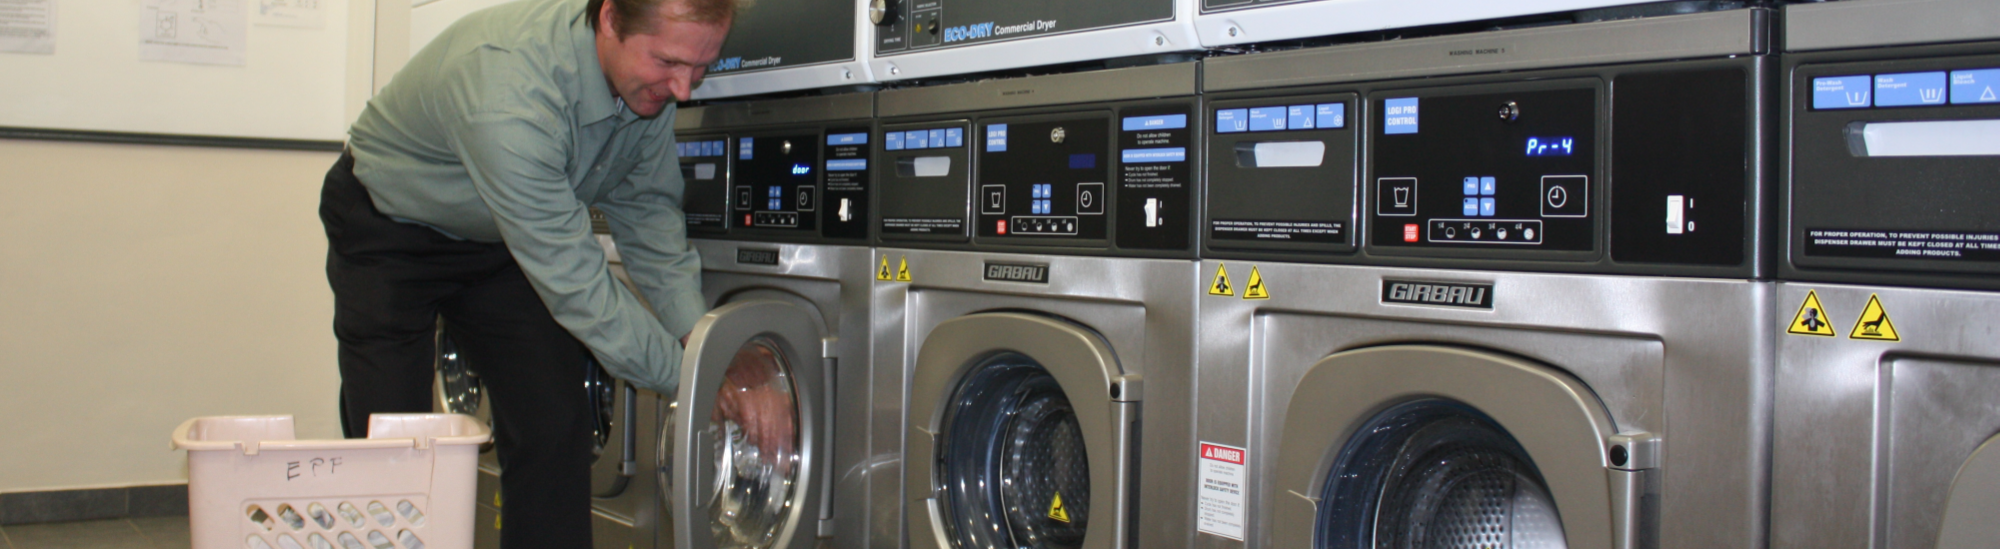 Laundry washers and dryers